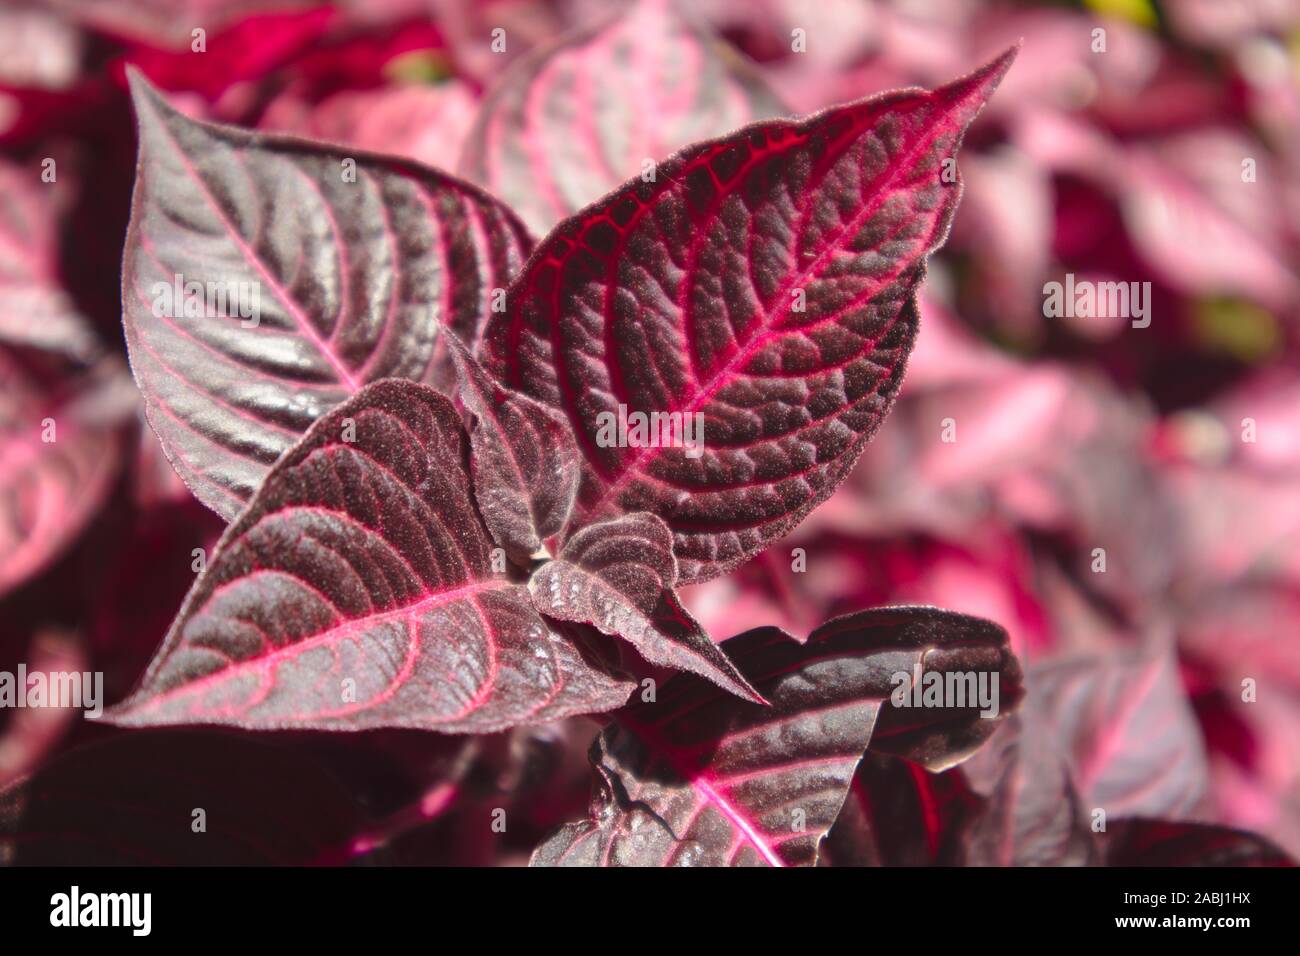 Close-up of some leaves of a Bloodleaf plant (Iresine herbstii 'Acuminata') in an outdoor garden Stock Photo